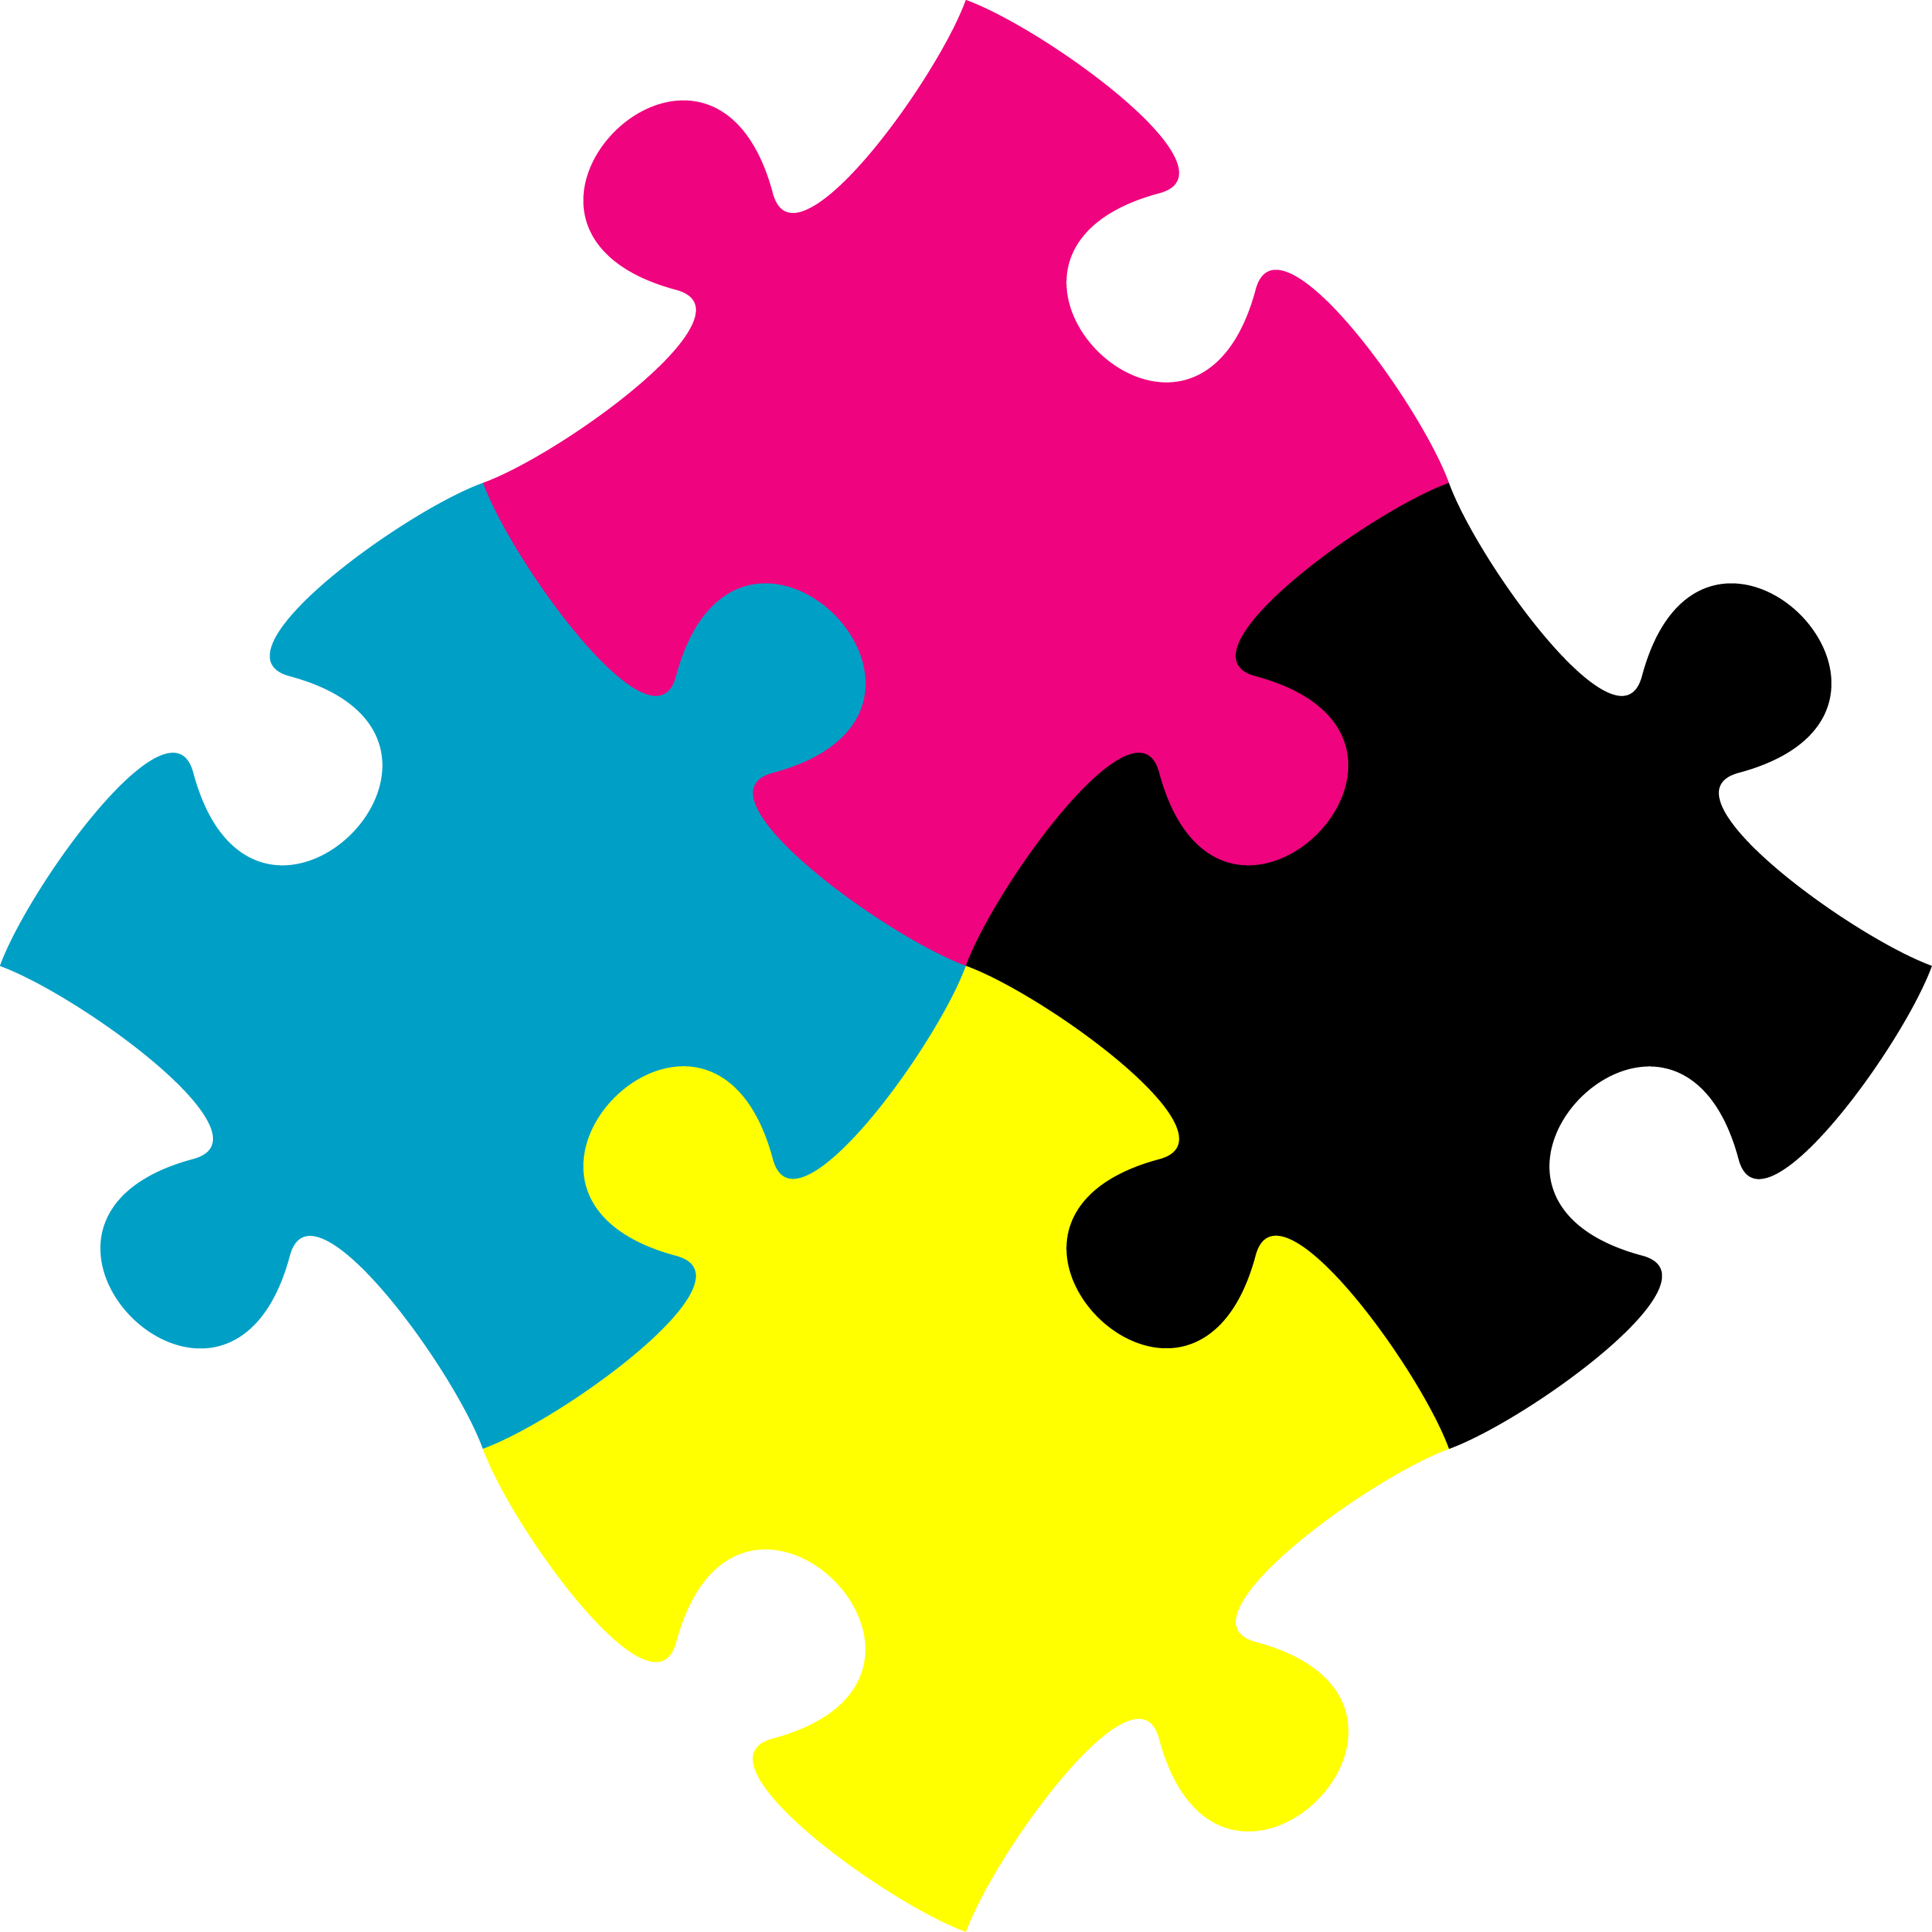 Jigsaw Puzzle Free Png Image - Jigsaw Puzzle Pieces, Transparent background PNG HD thumbnail